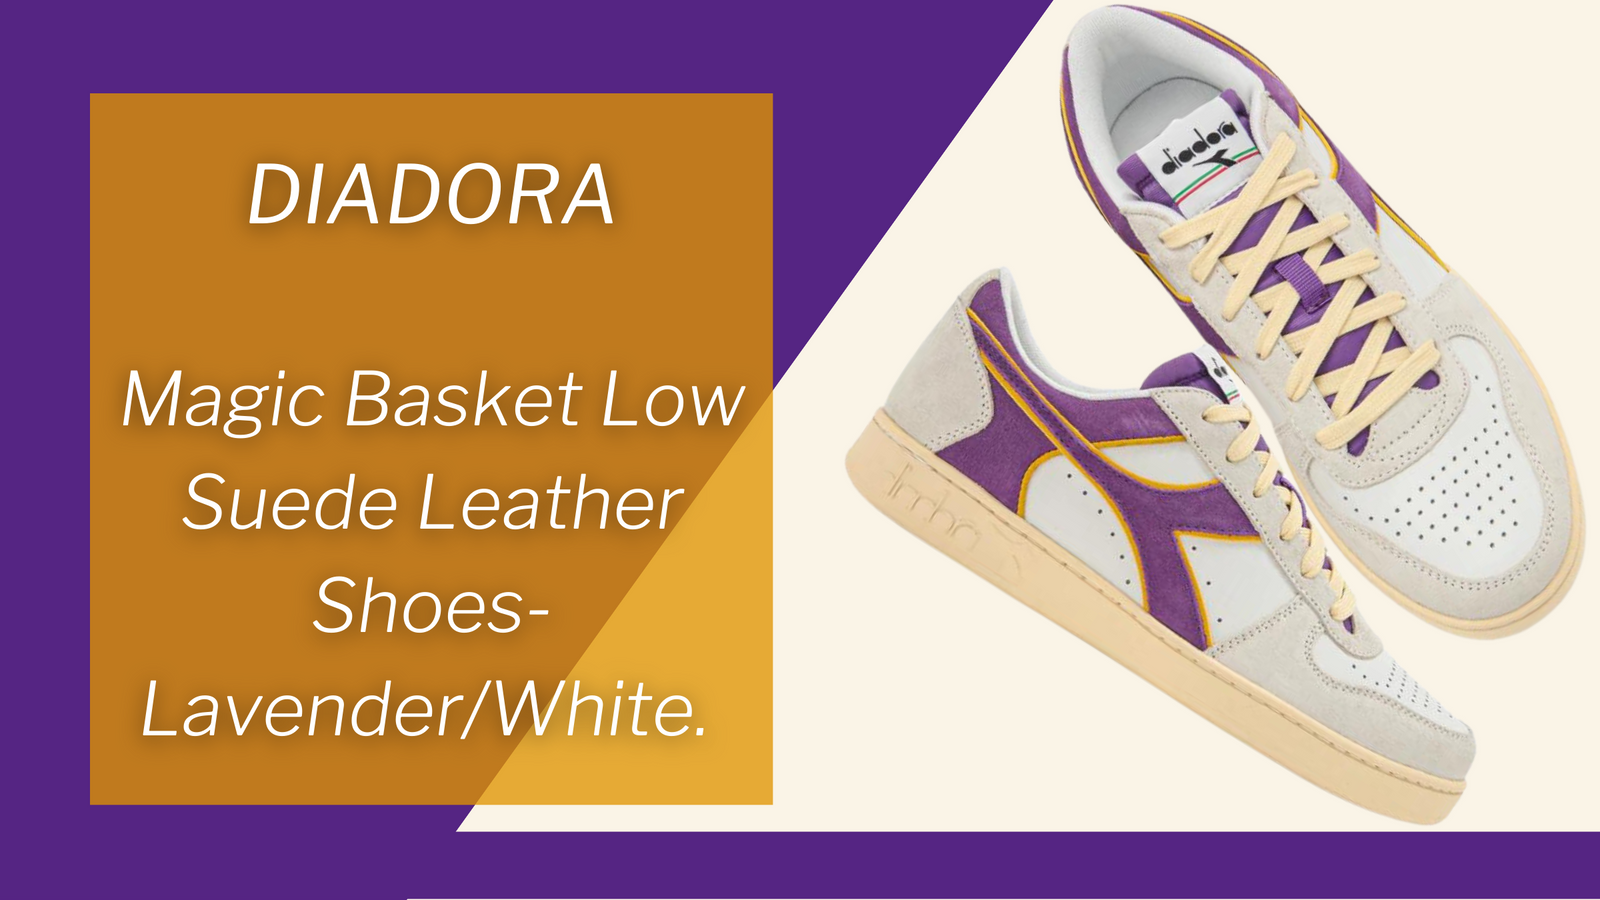 Of Lakers and Sneakers: The Shoes of Choice for 3 Basketball Icons